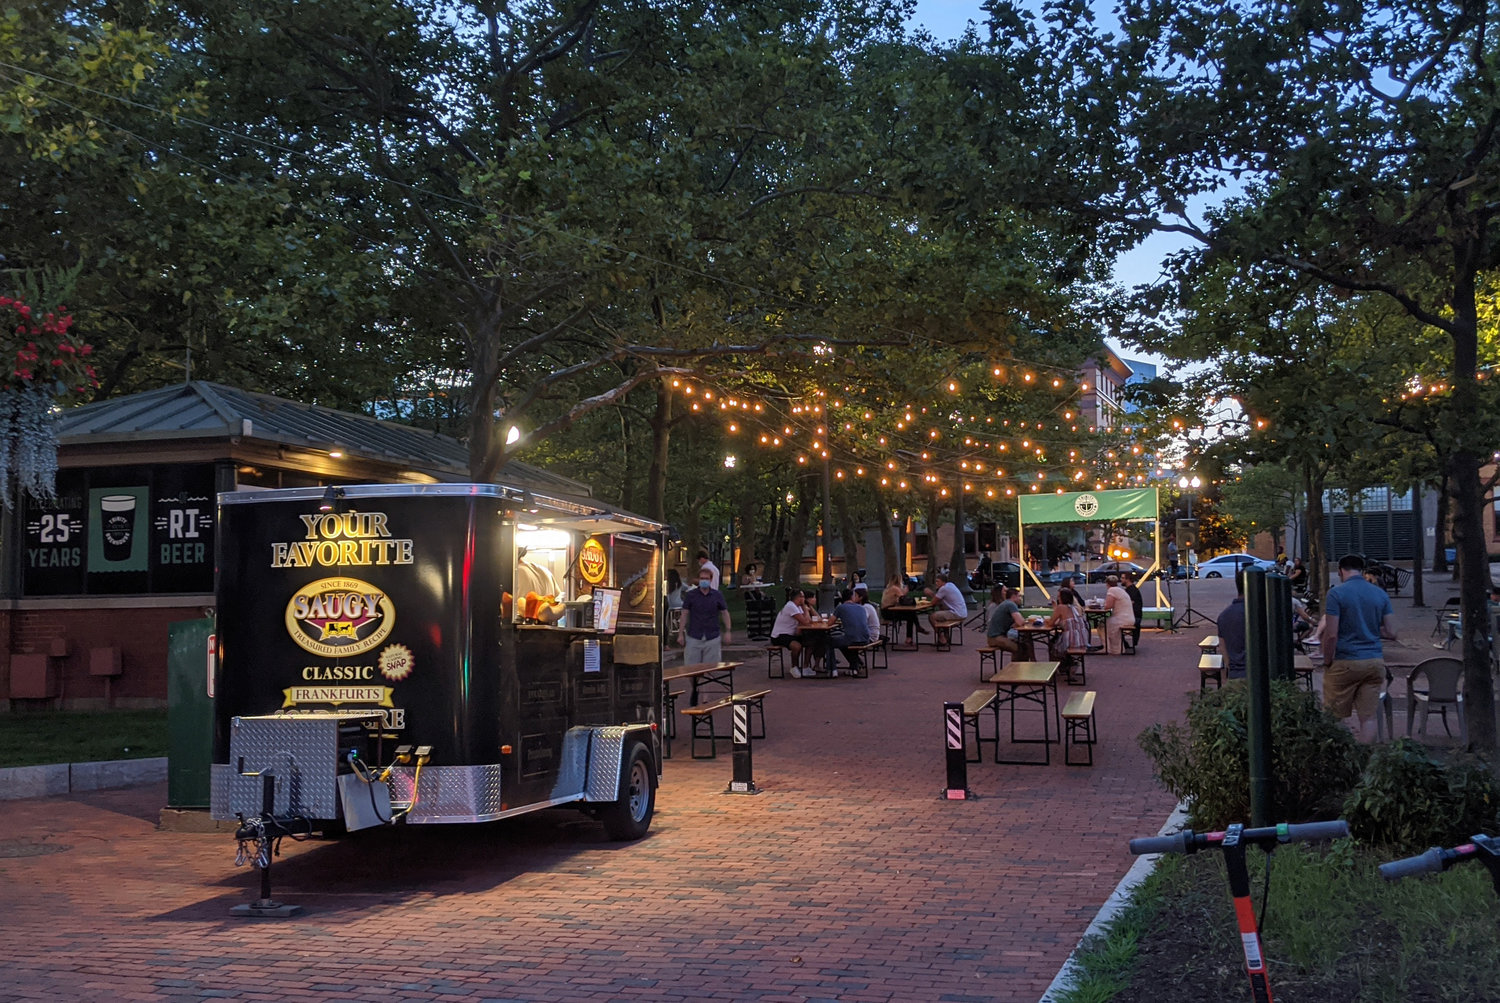 Outdoor trivia takes place at Trinity Beer Garden every Thursday